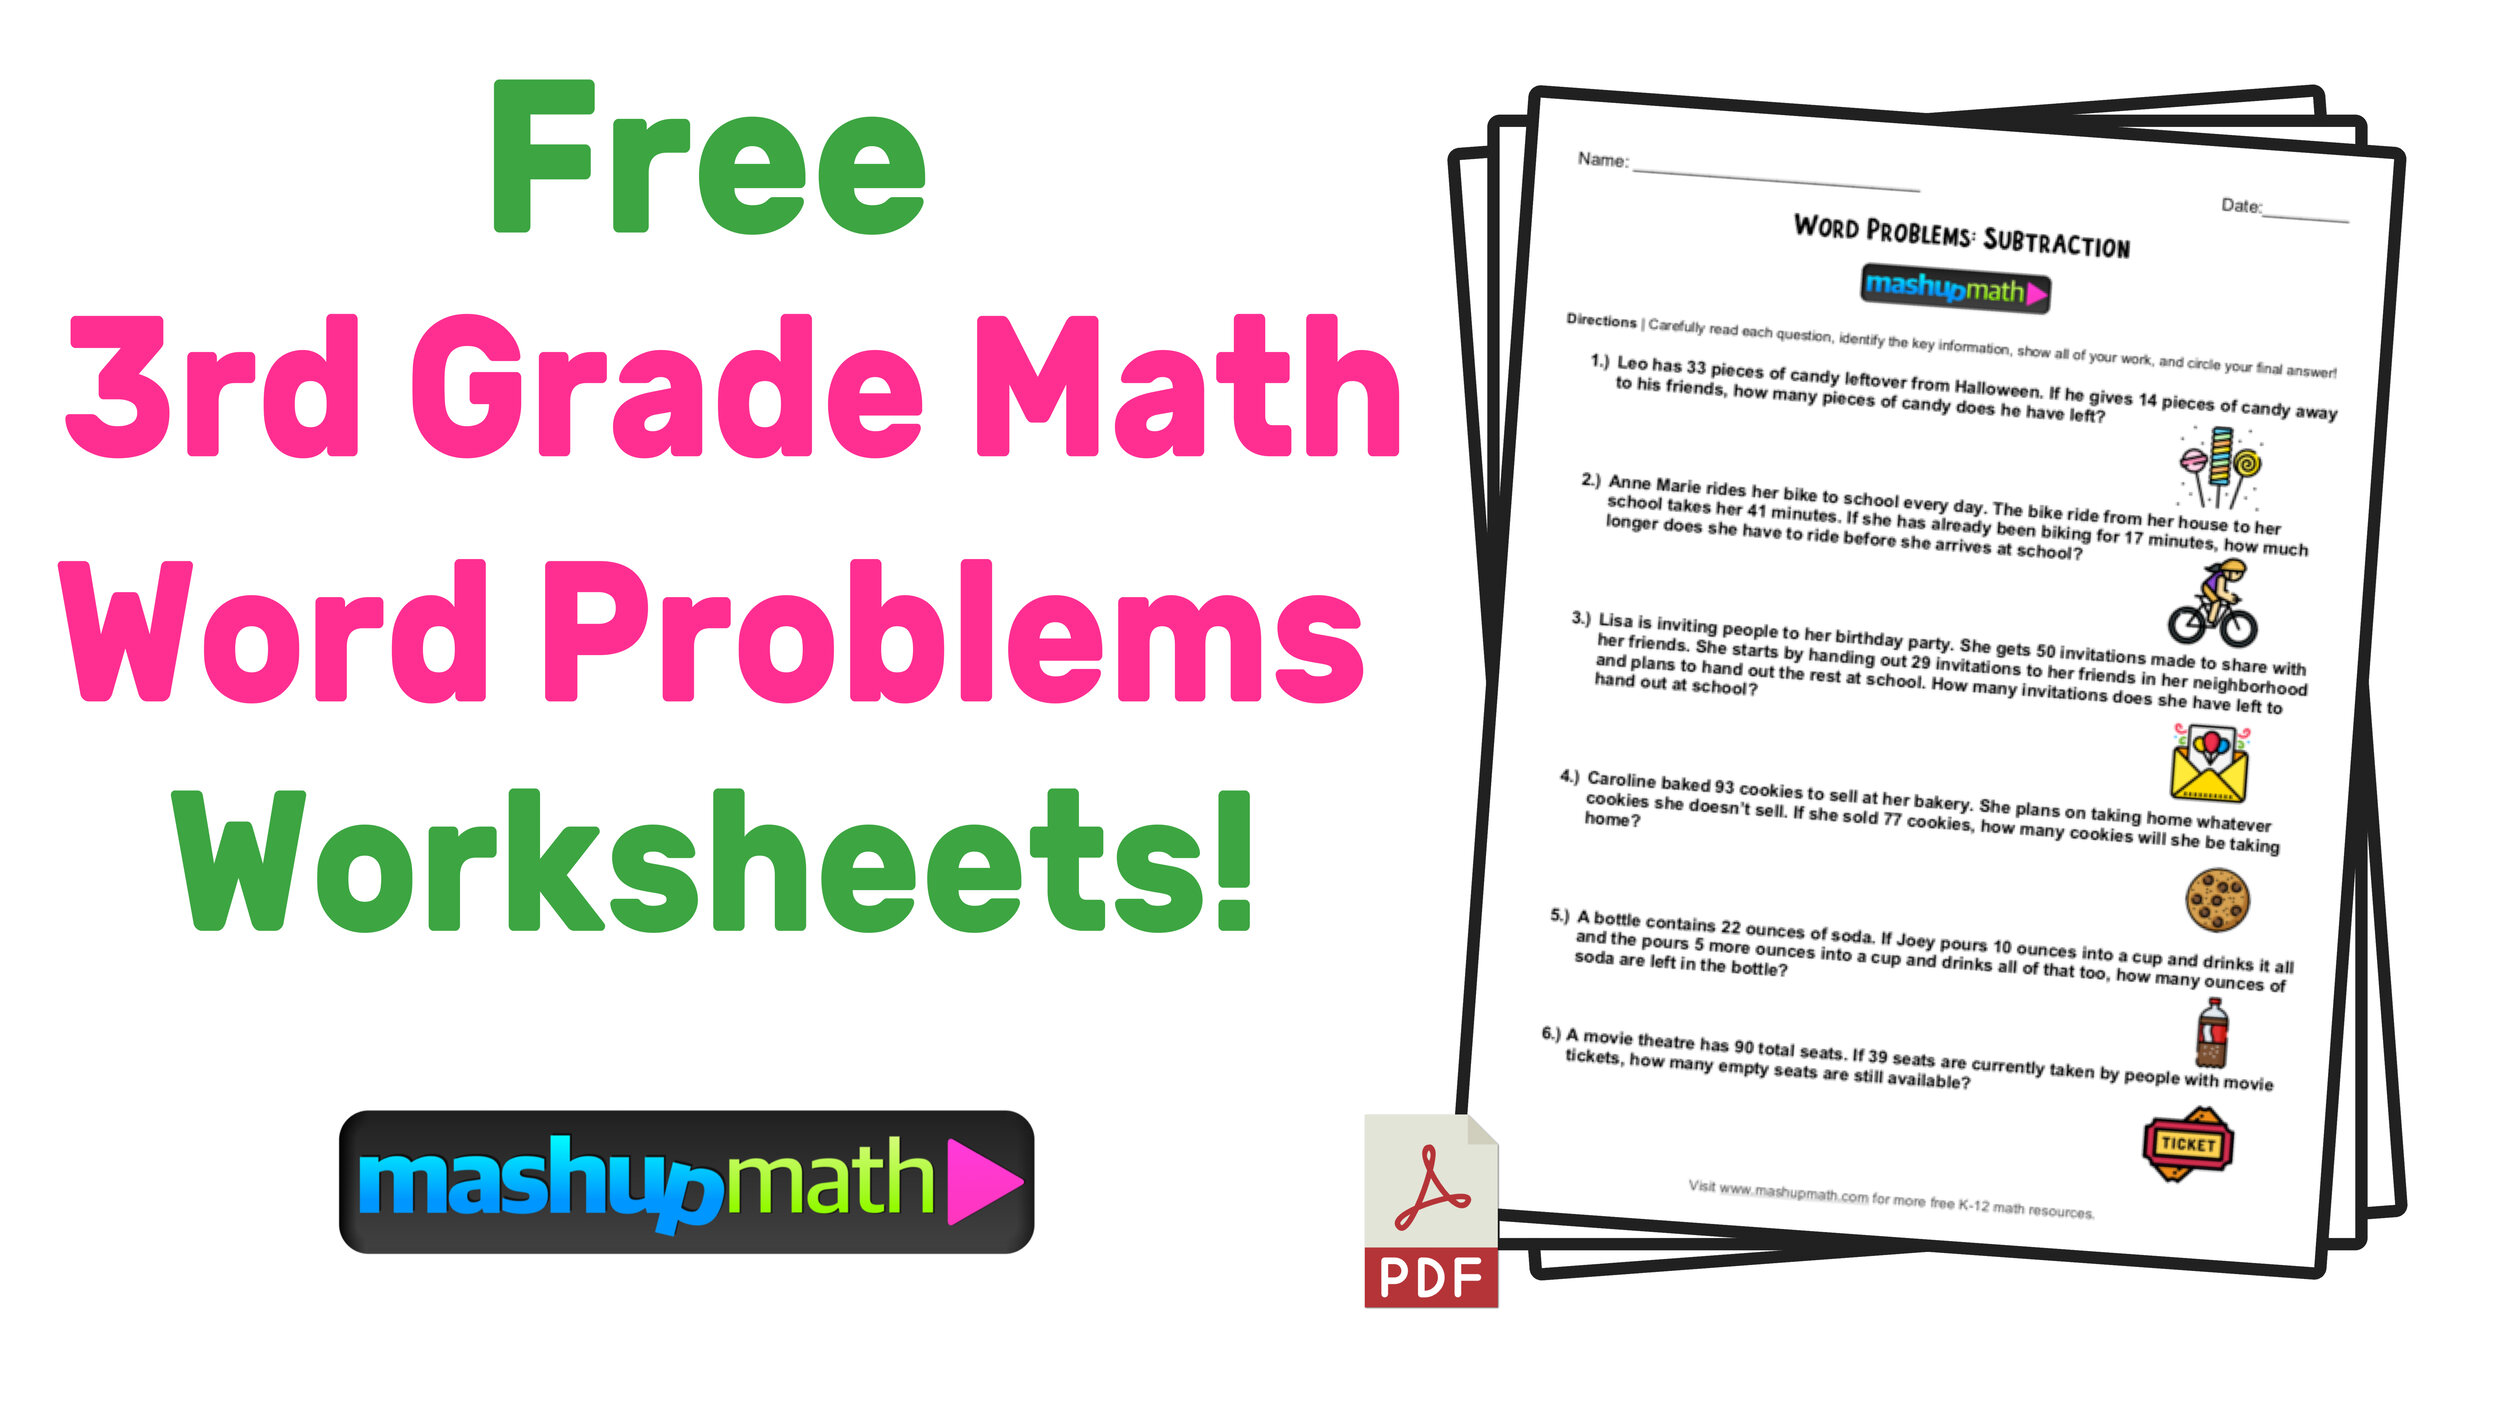 30rd Grade Math Word Problems: Free Worksheets with Answers